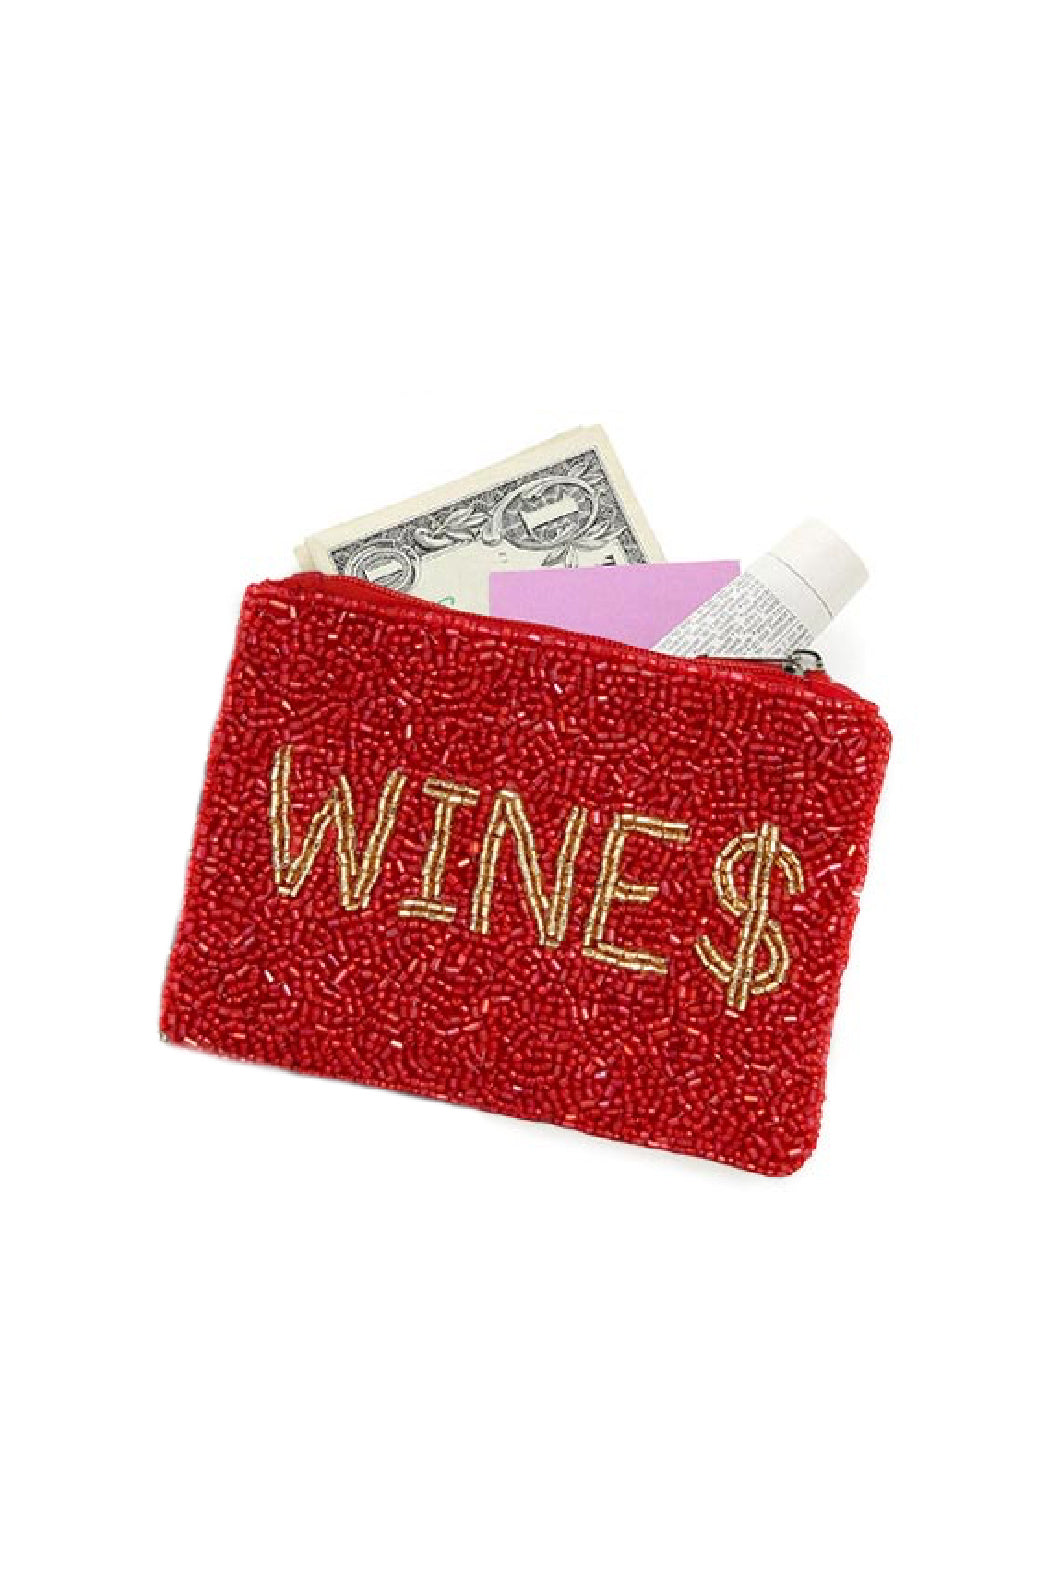 WINE $ Beaded Pouch